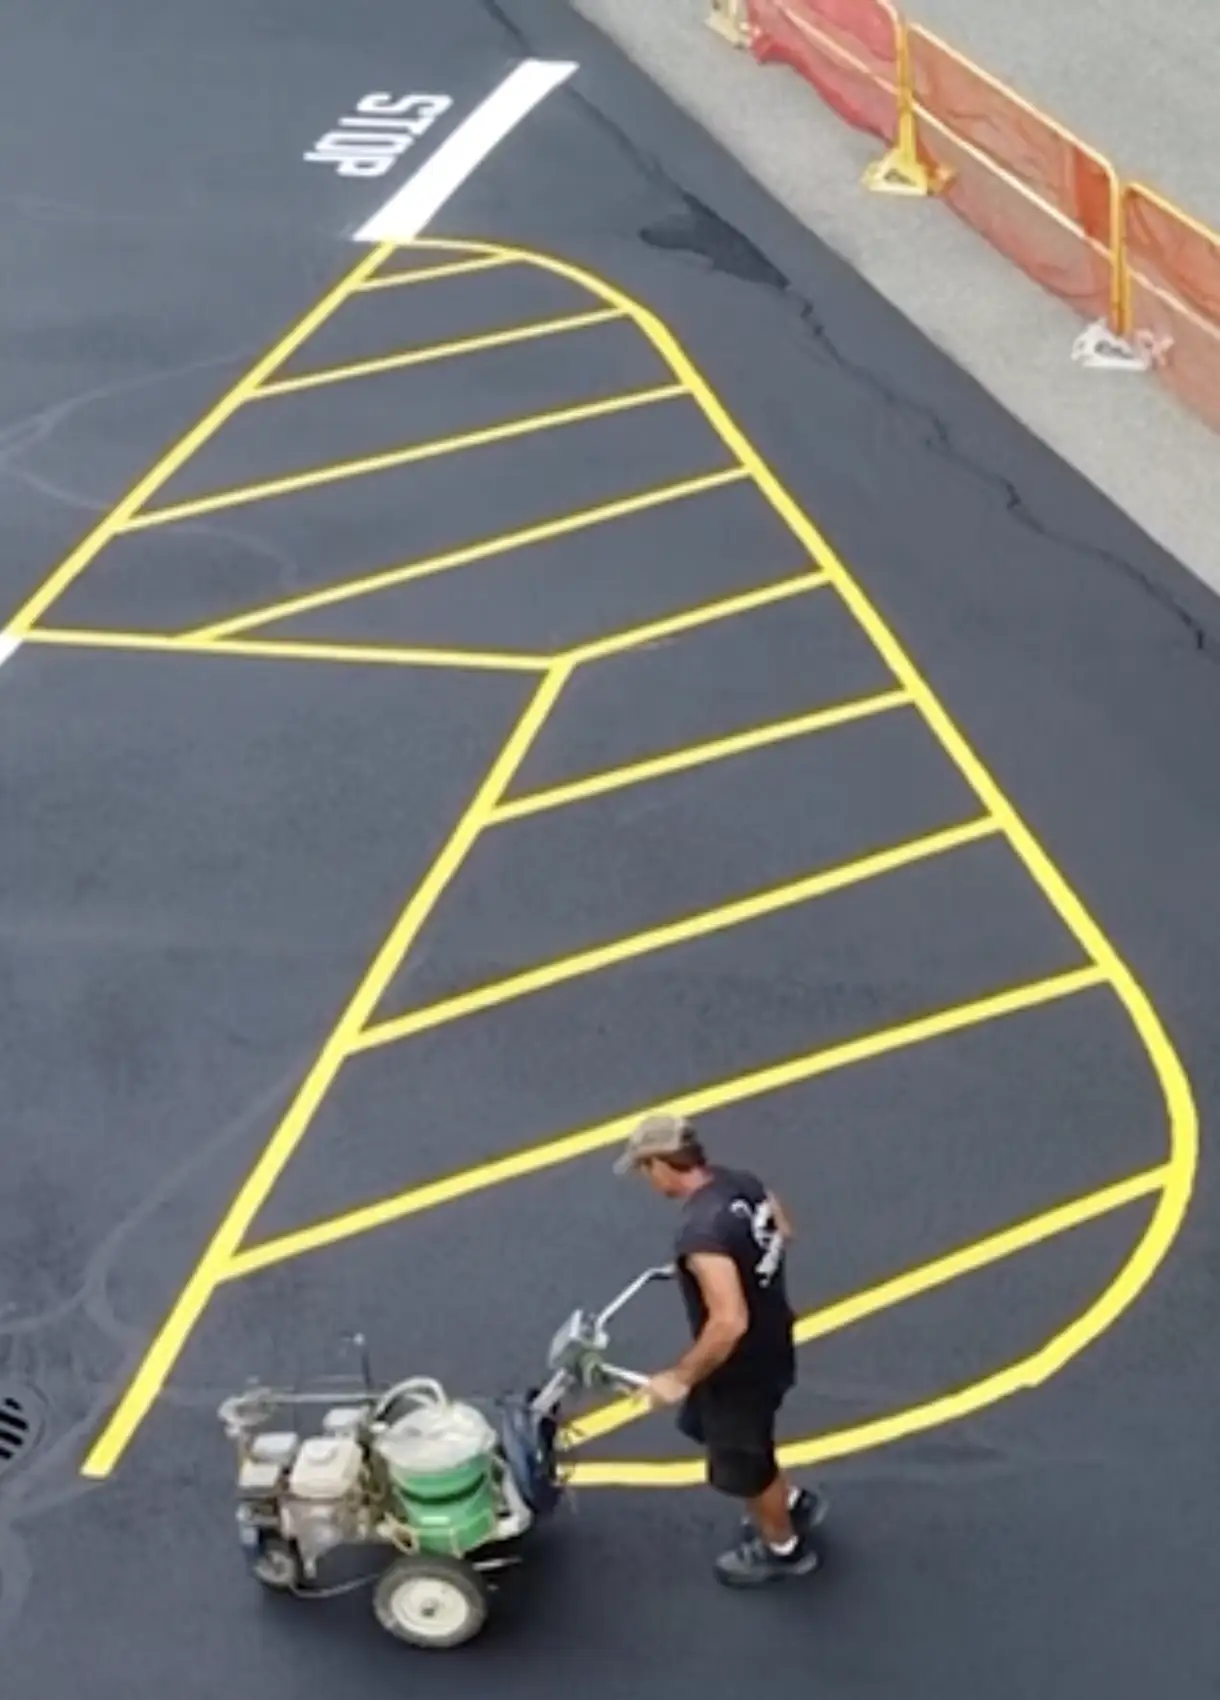 parking lot striping company new work